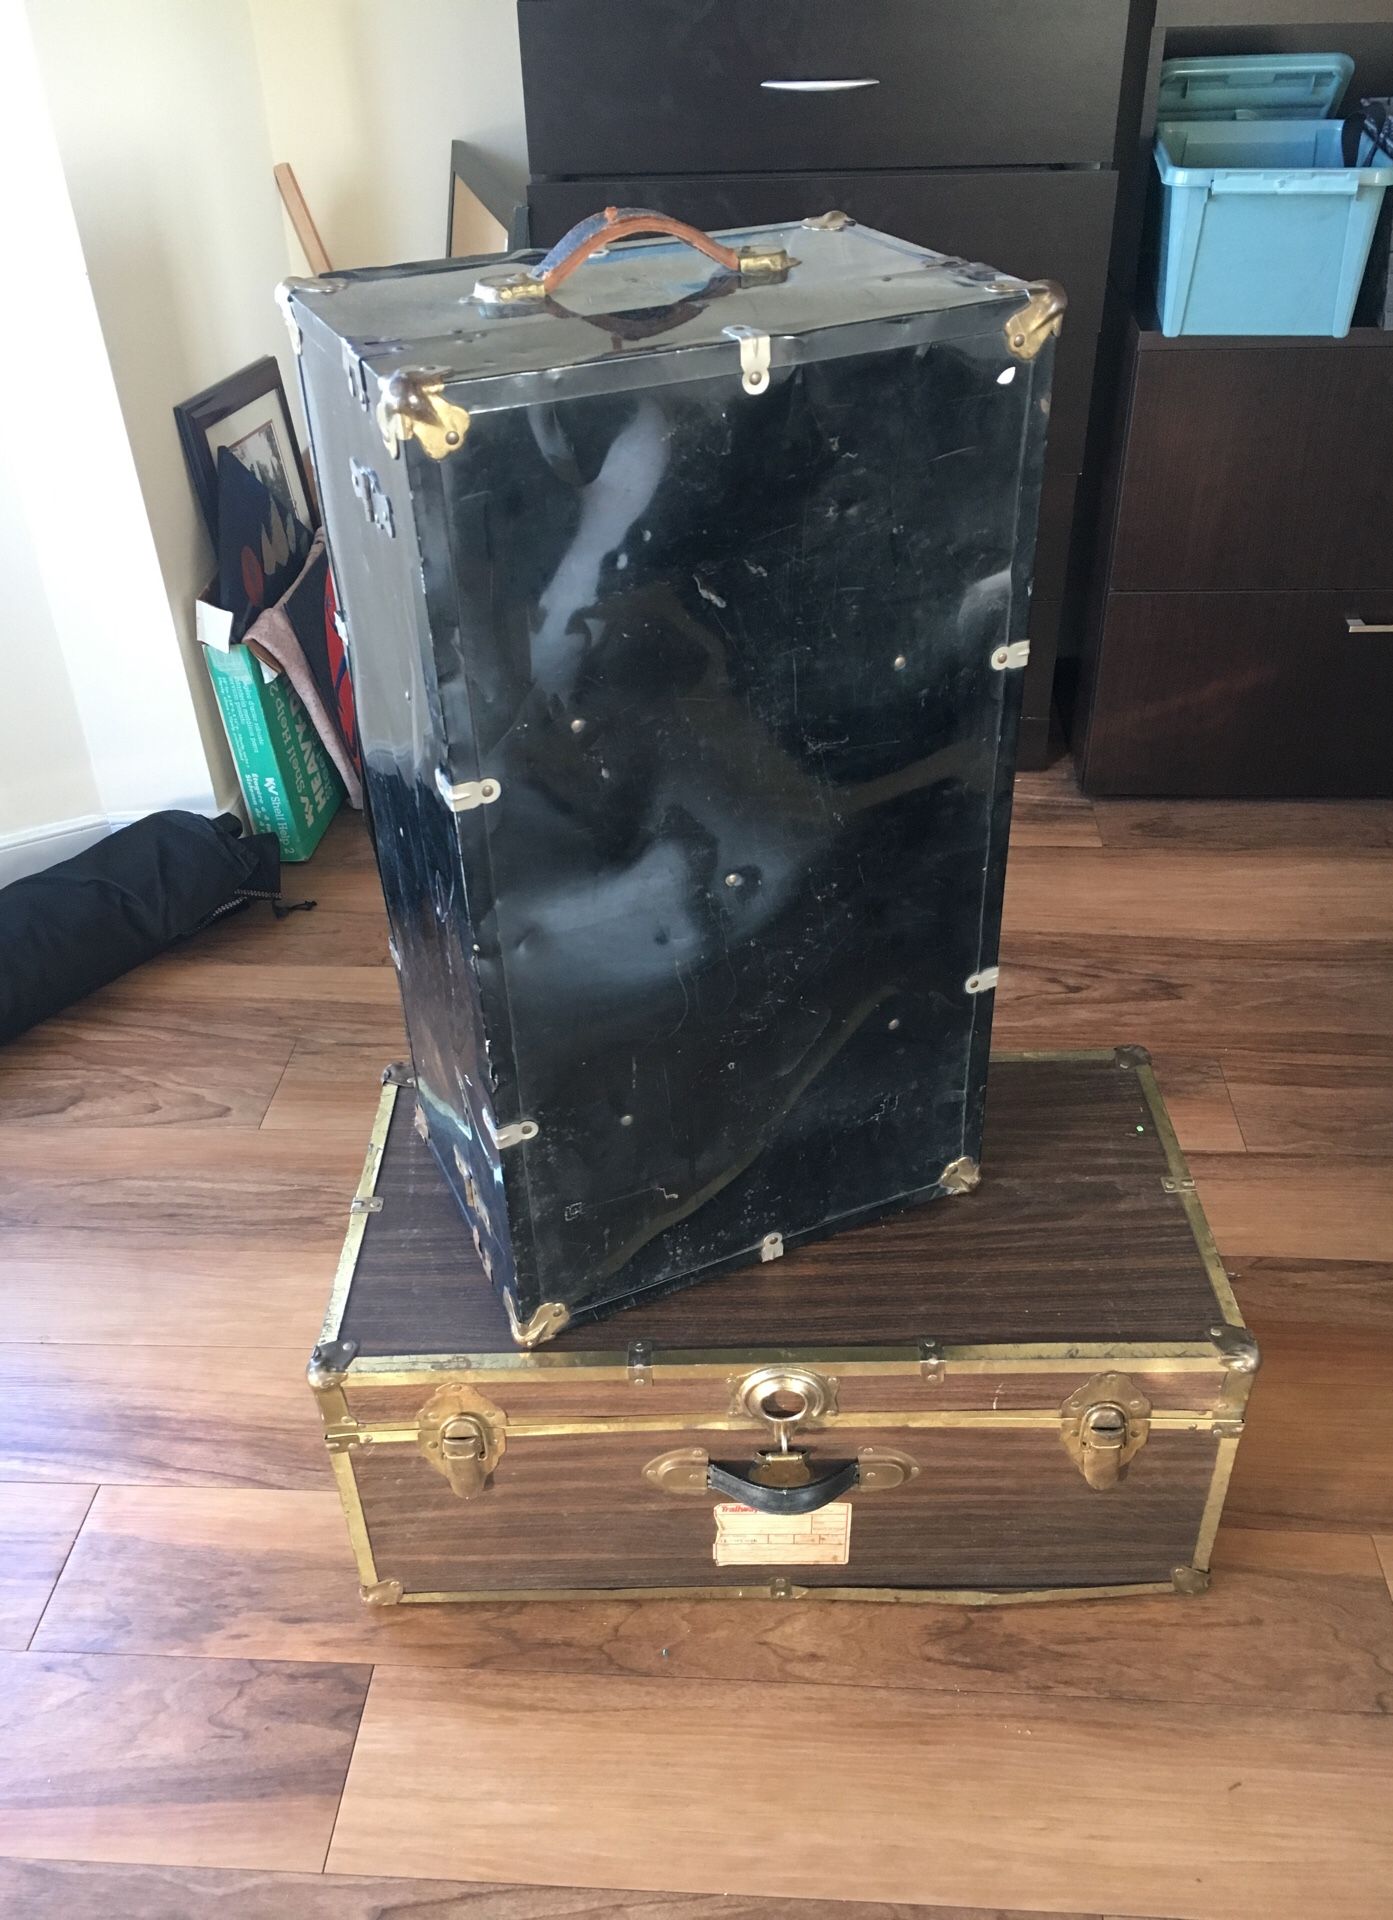 Steamer trunks and small trunk